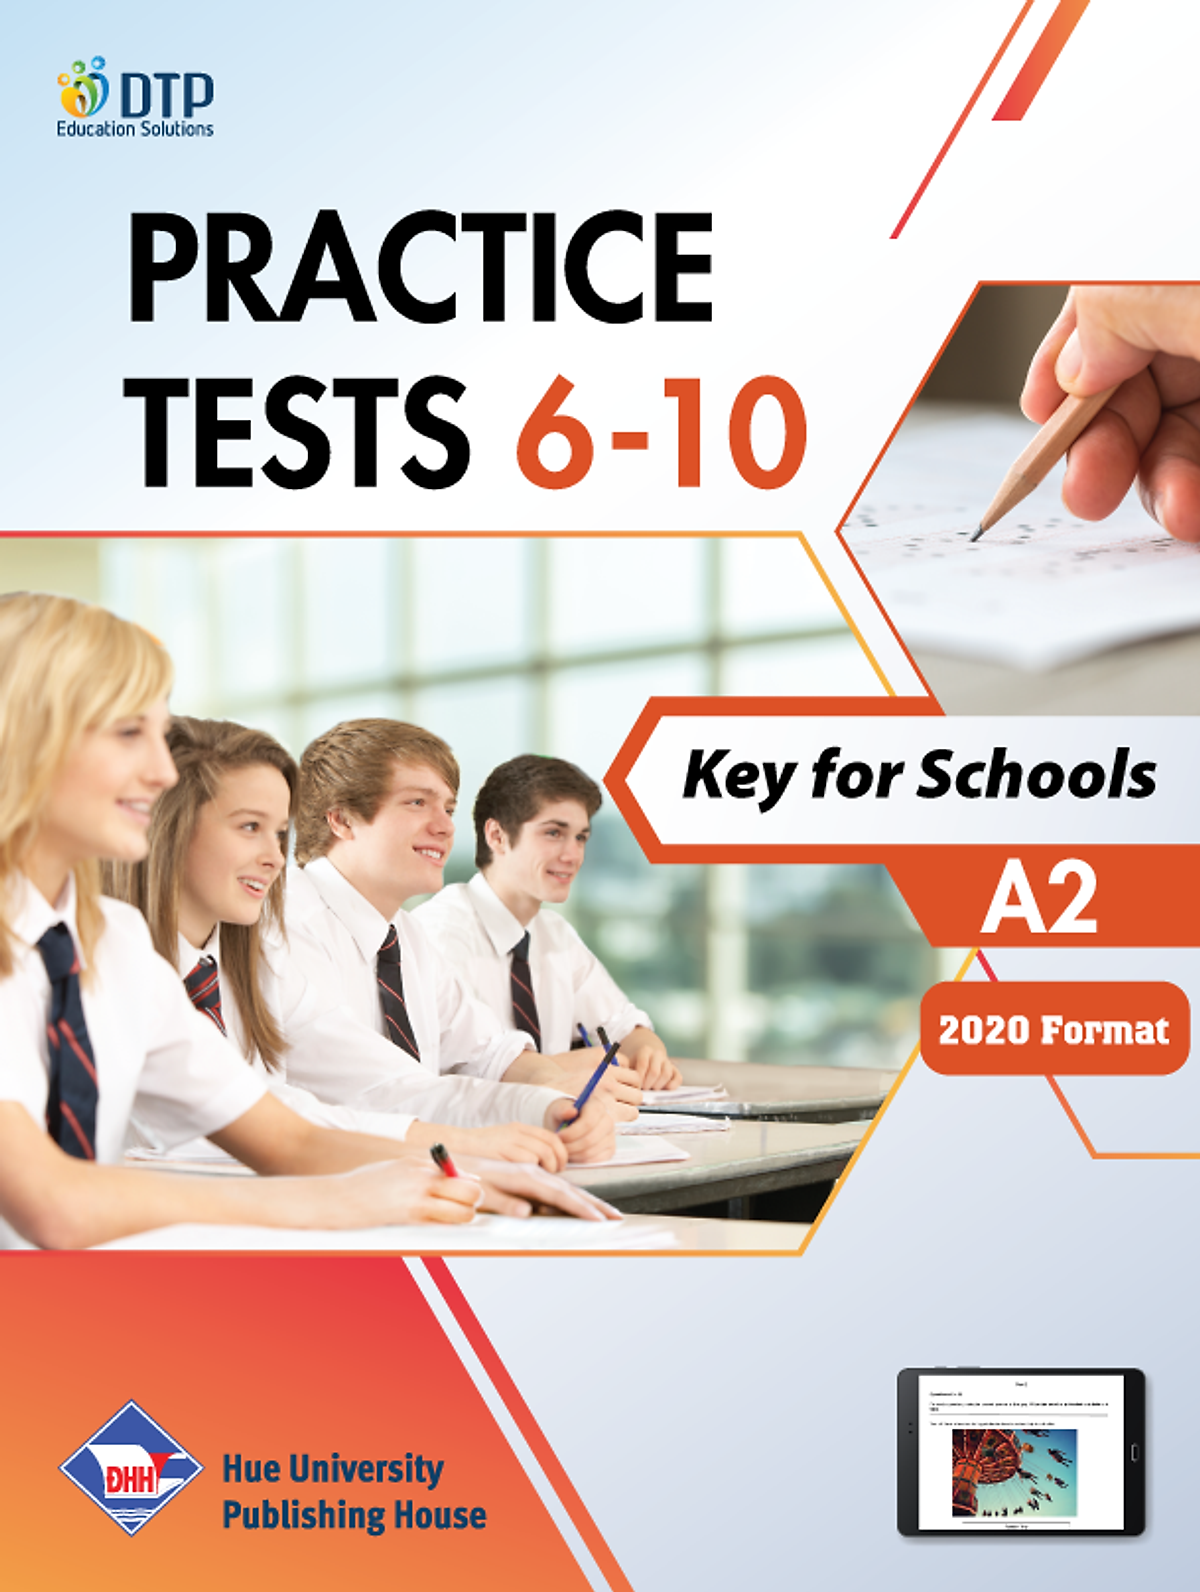 A2 Key For Schools Practice Tests 6-10